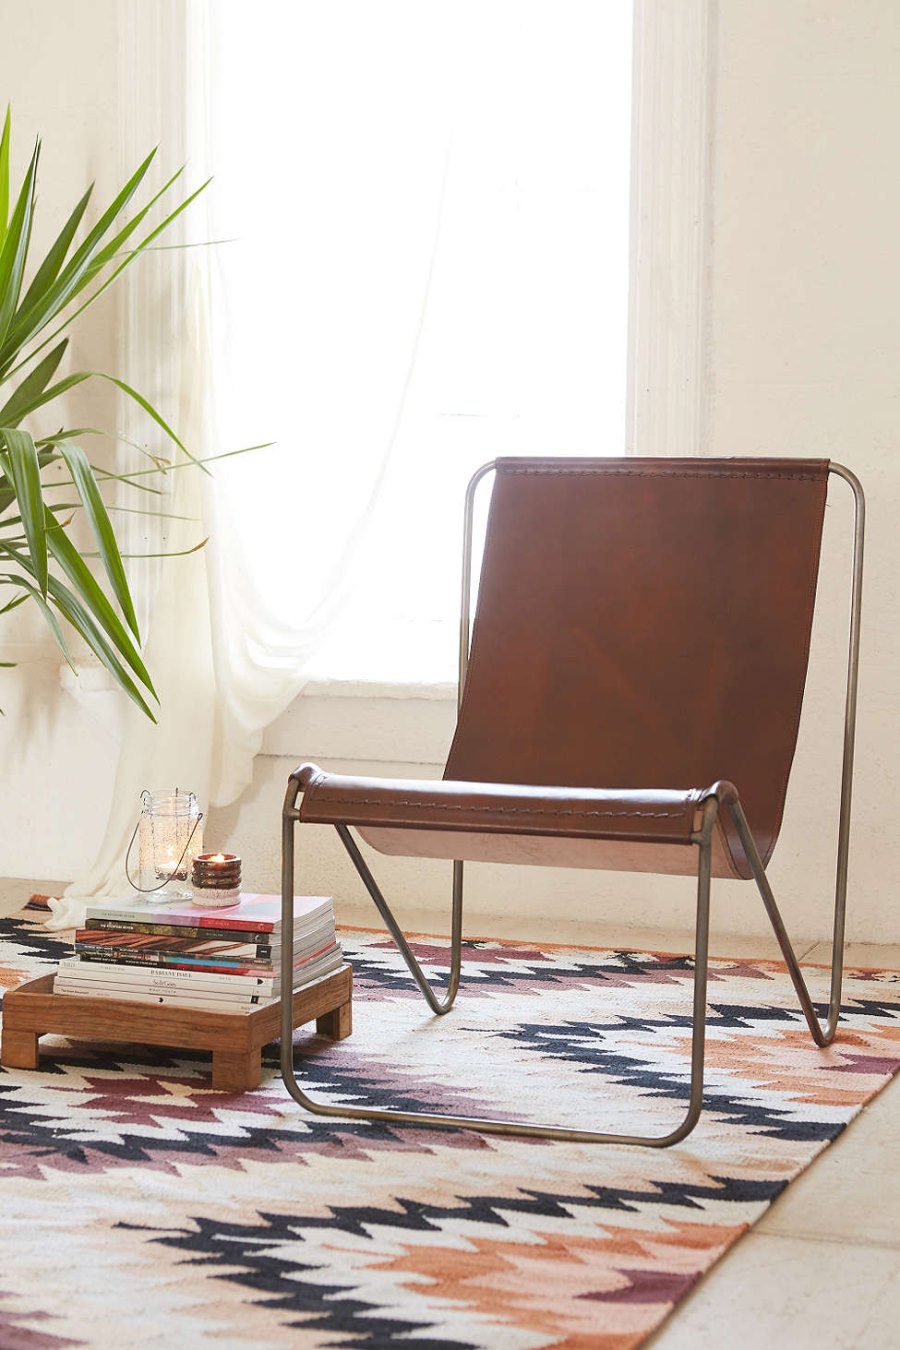 Leather sling chair from Urban Outfitters